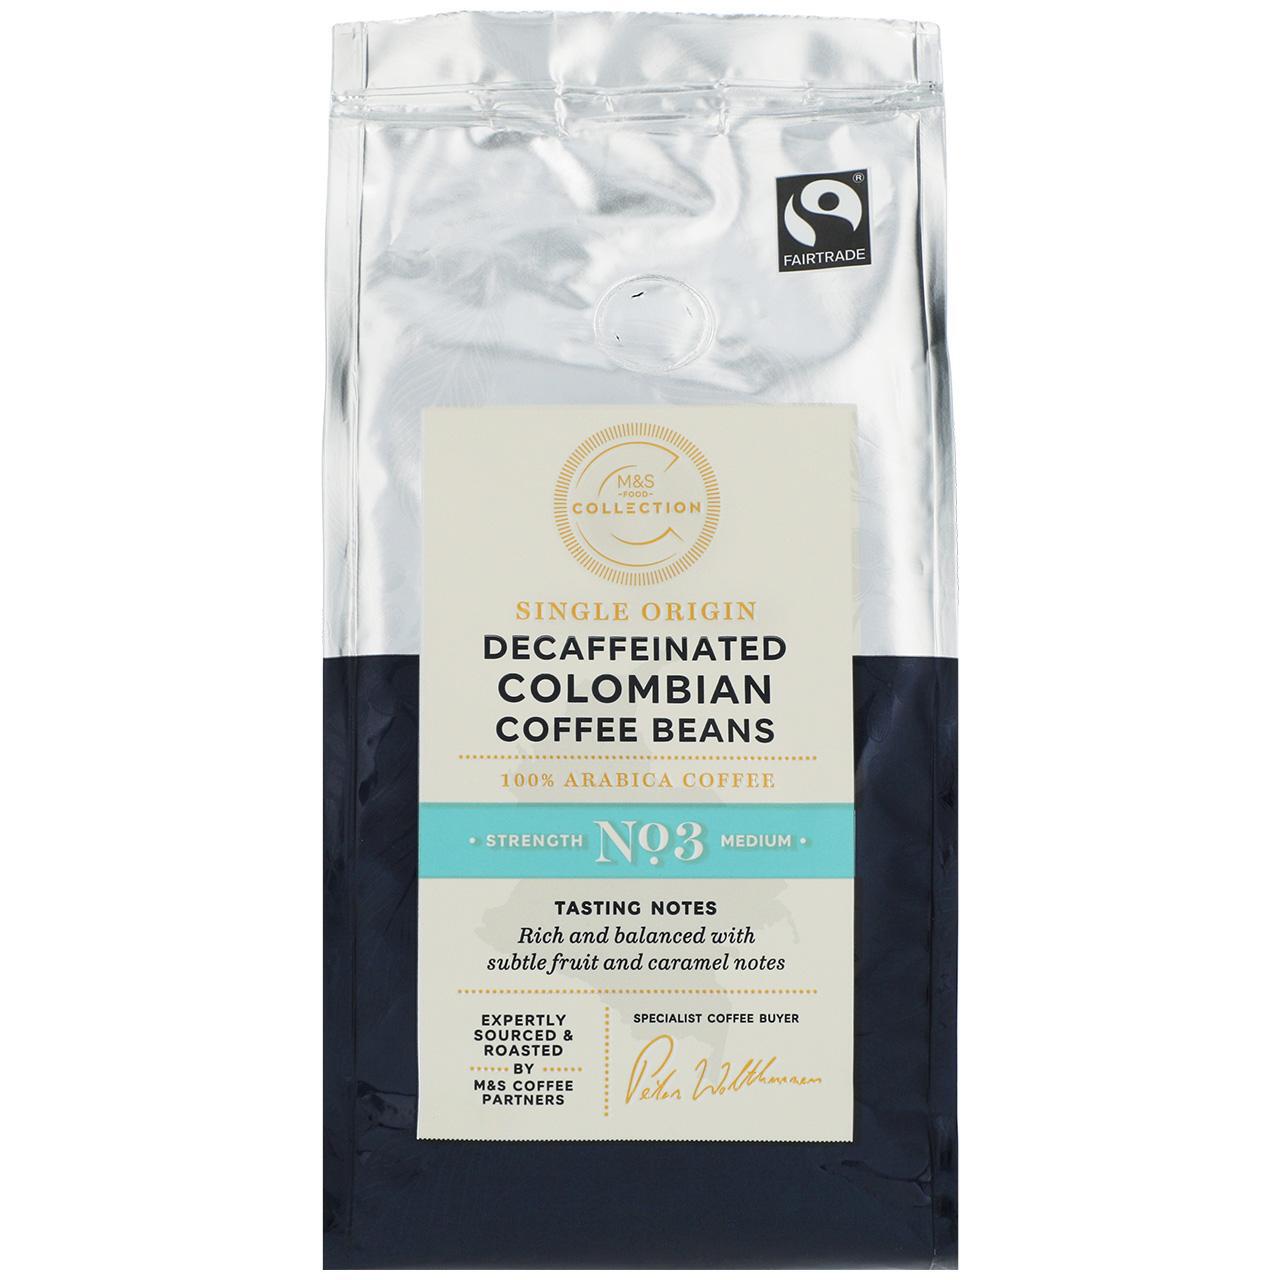 M&S Fairtrade Colombian Decaffeinated Coffee Beans 227g